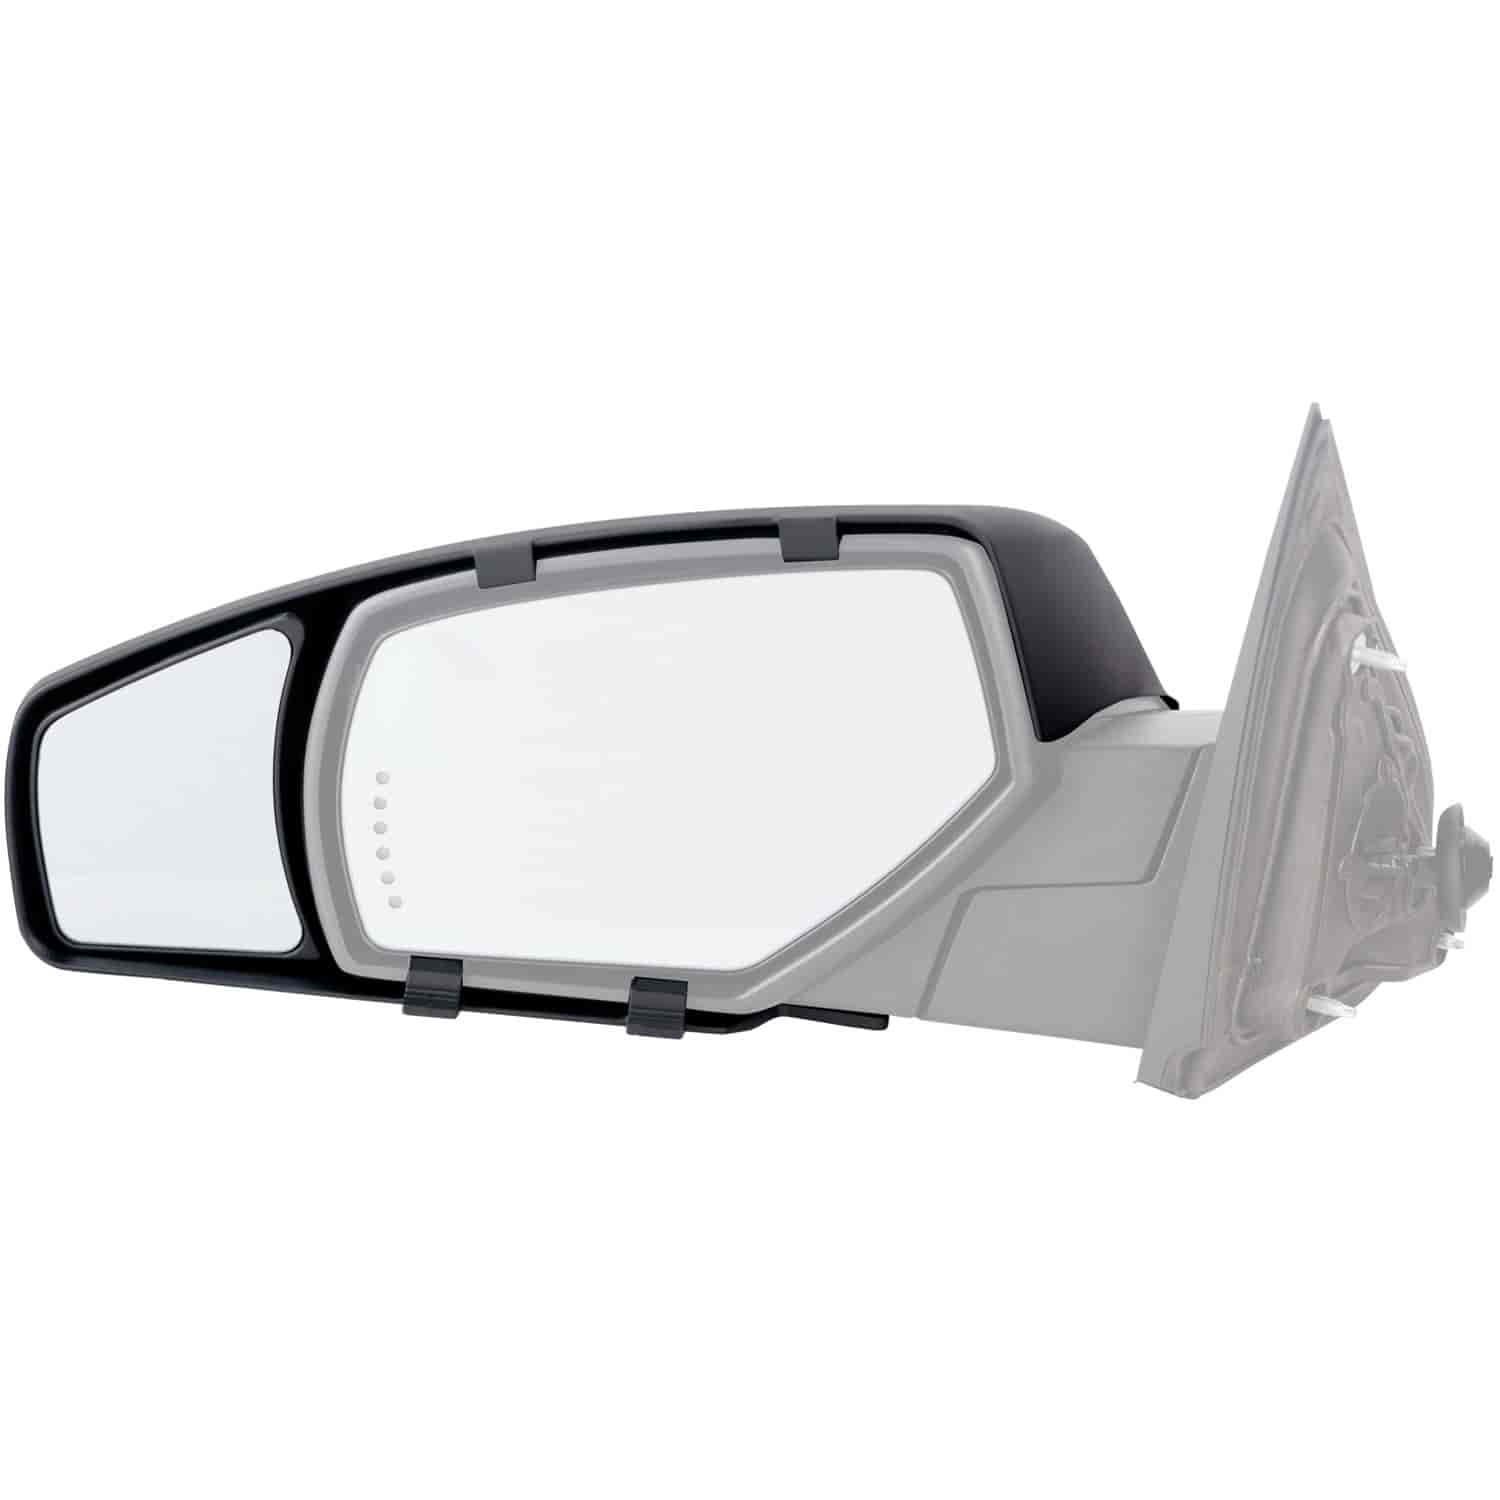 Snap-On Towing Mirrors Fits 2014-2018 Chevy Silverado & GMC Sierra